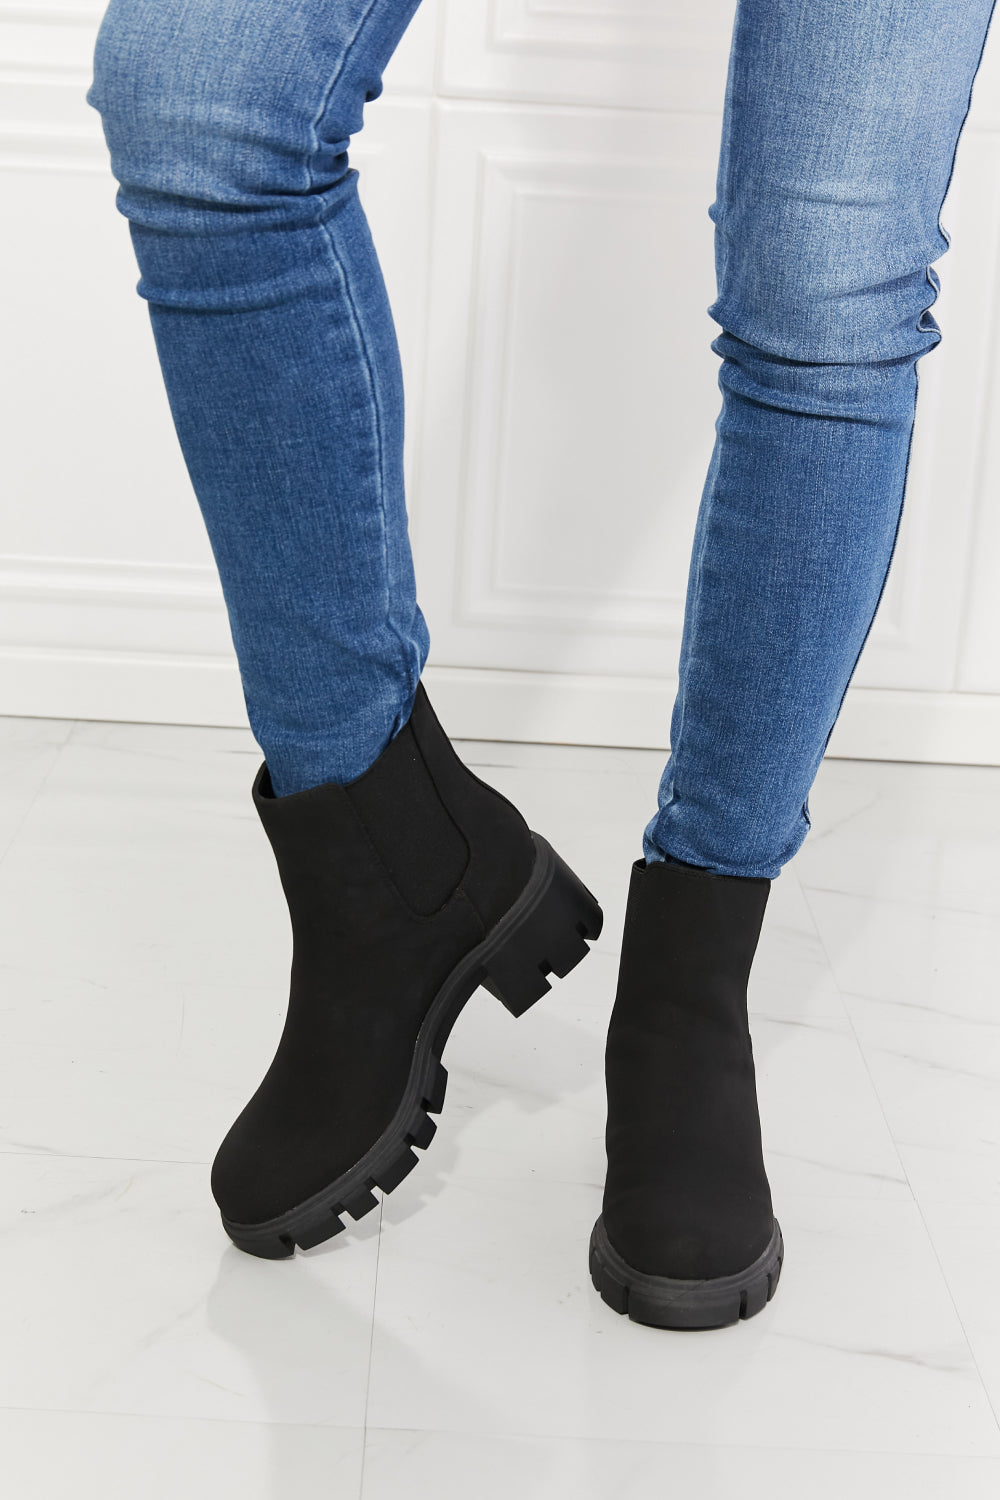 MMShoes Work For It Matte Lug Sole Chelsea Boots in Black - nailedmoms